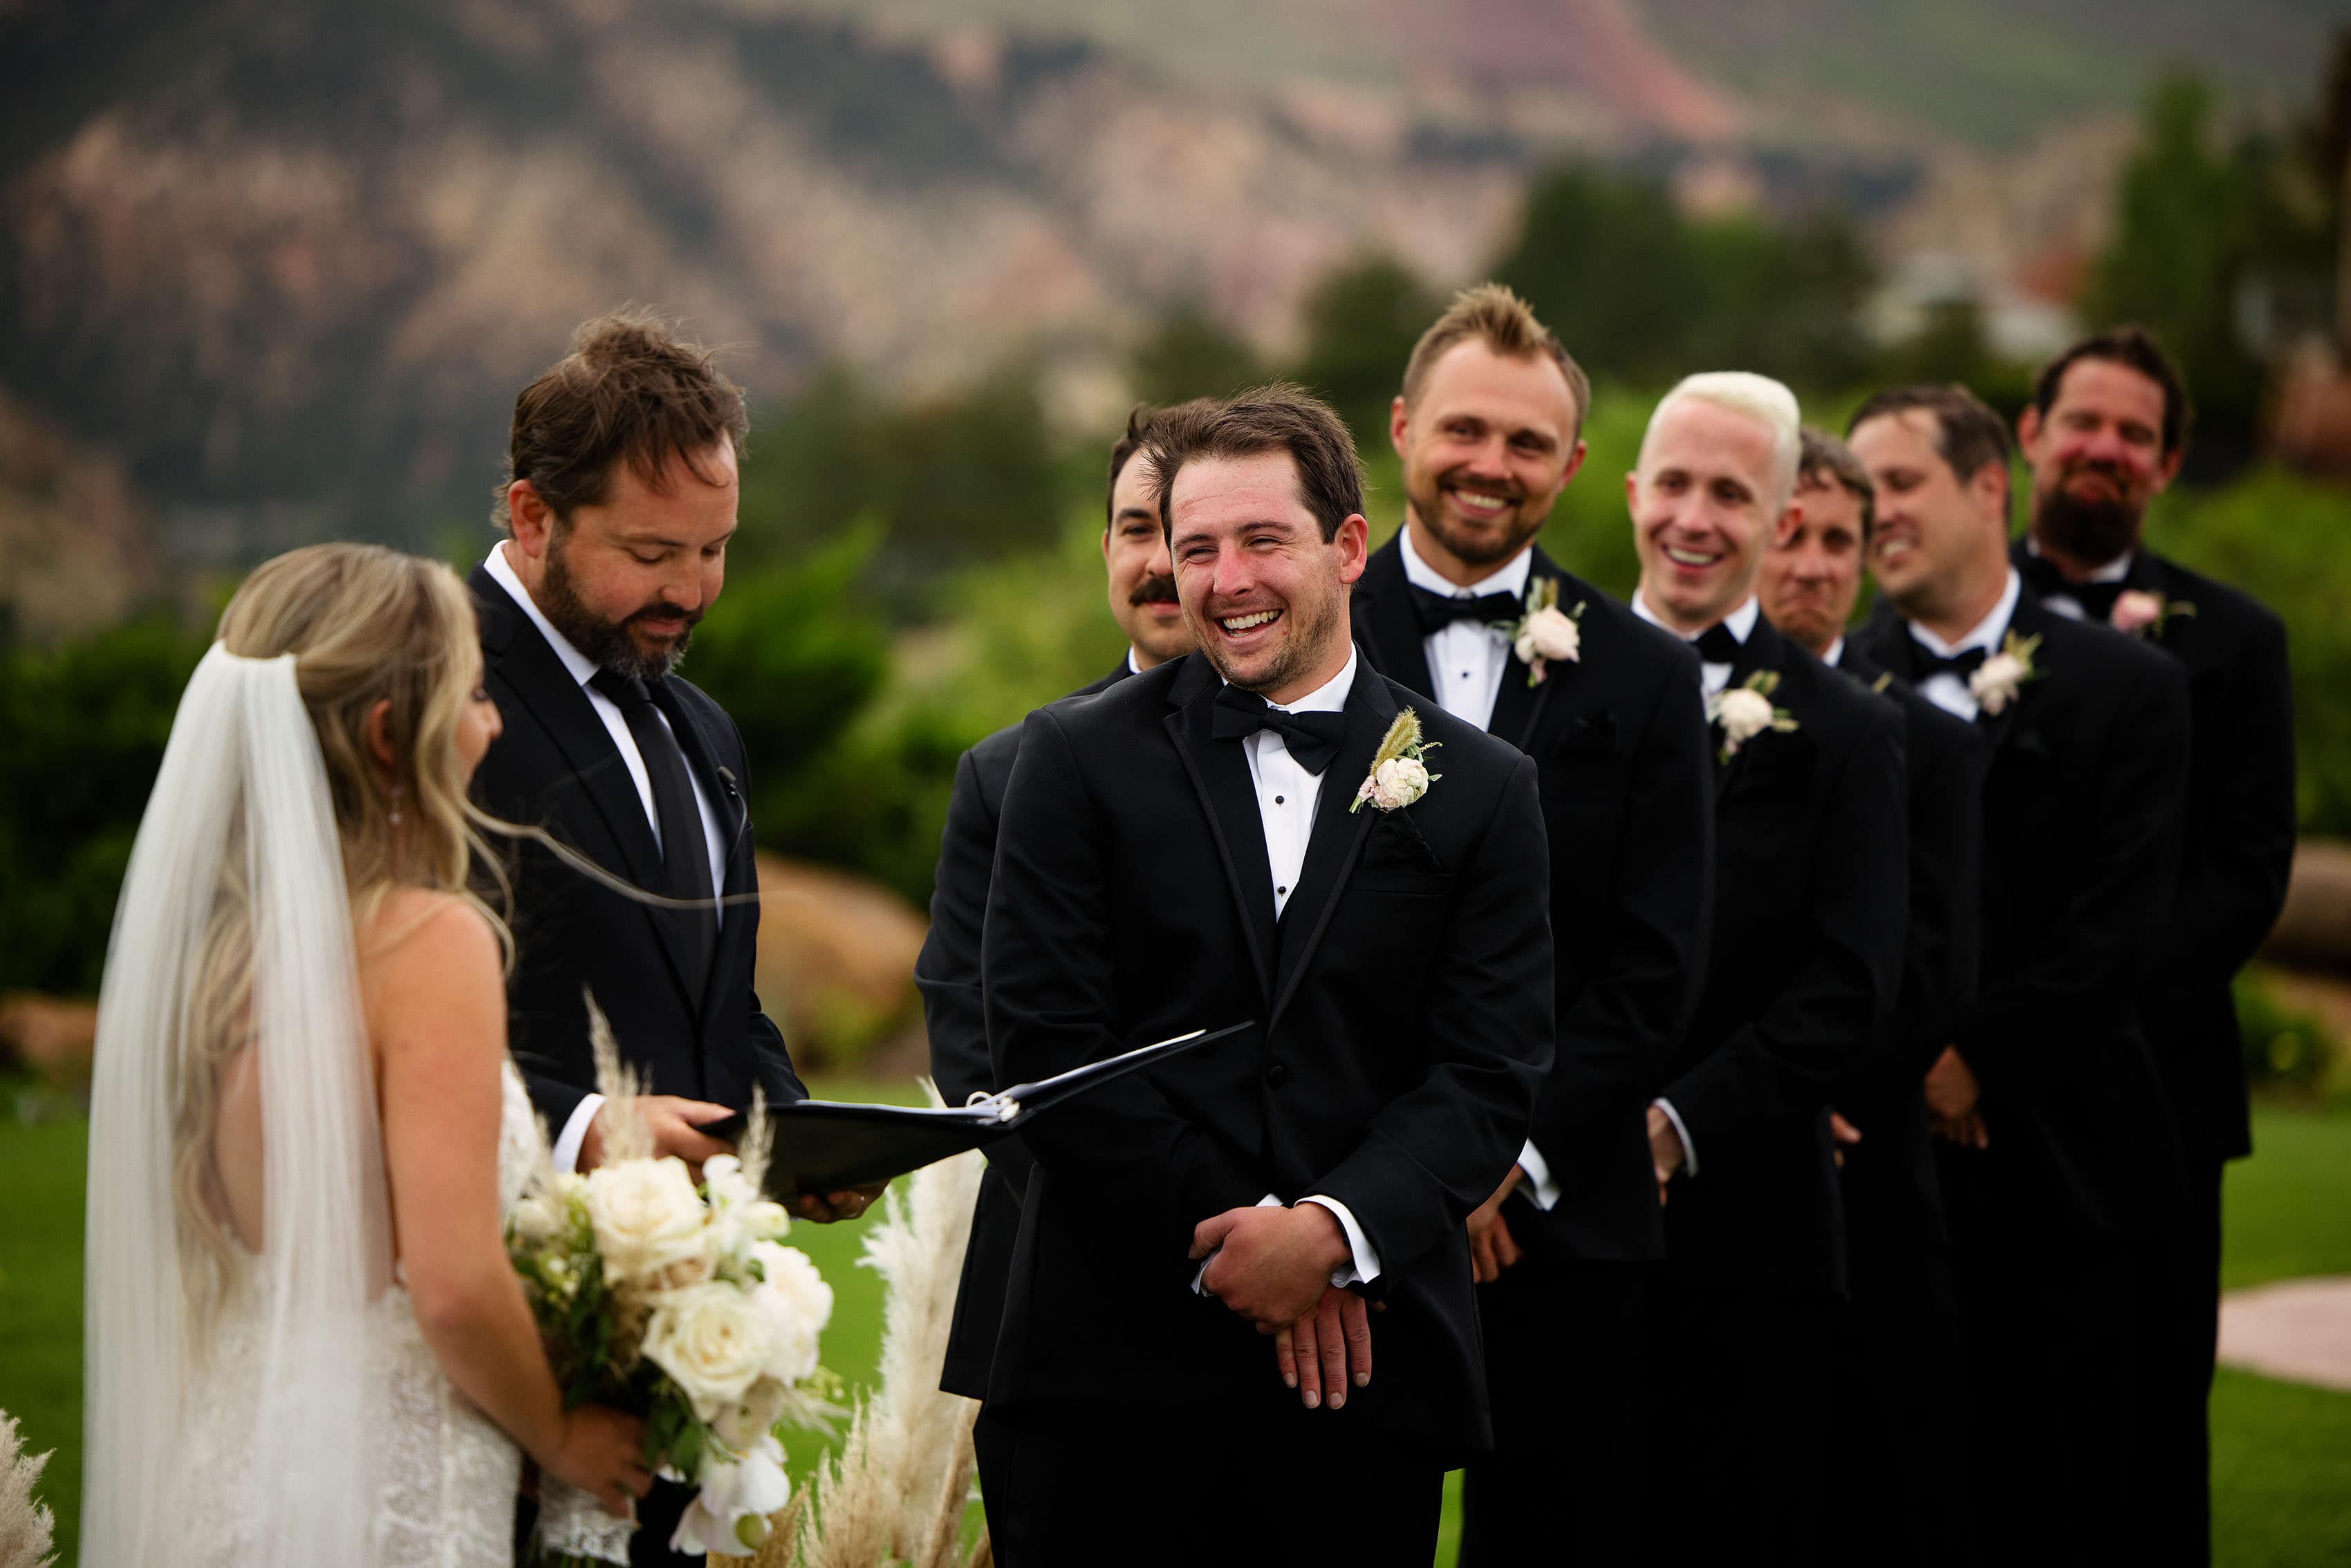 The groom laughs during the ceremony